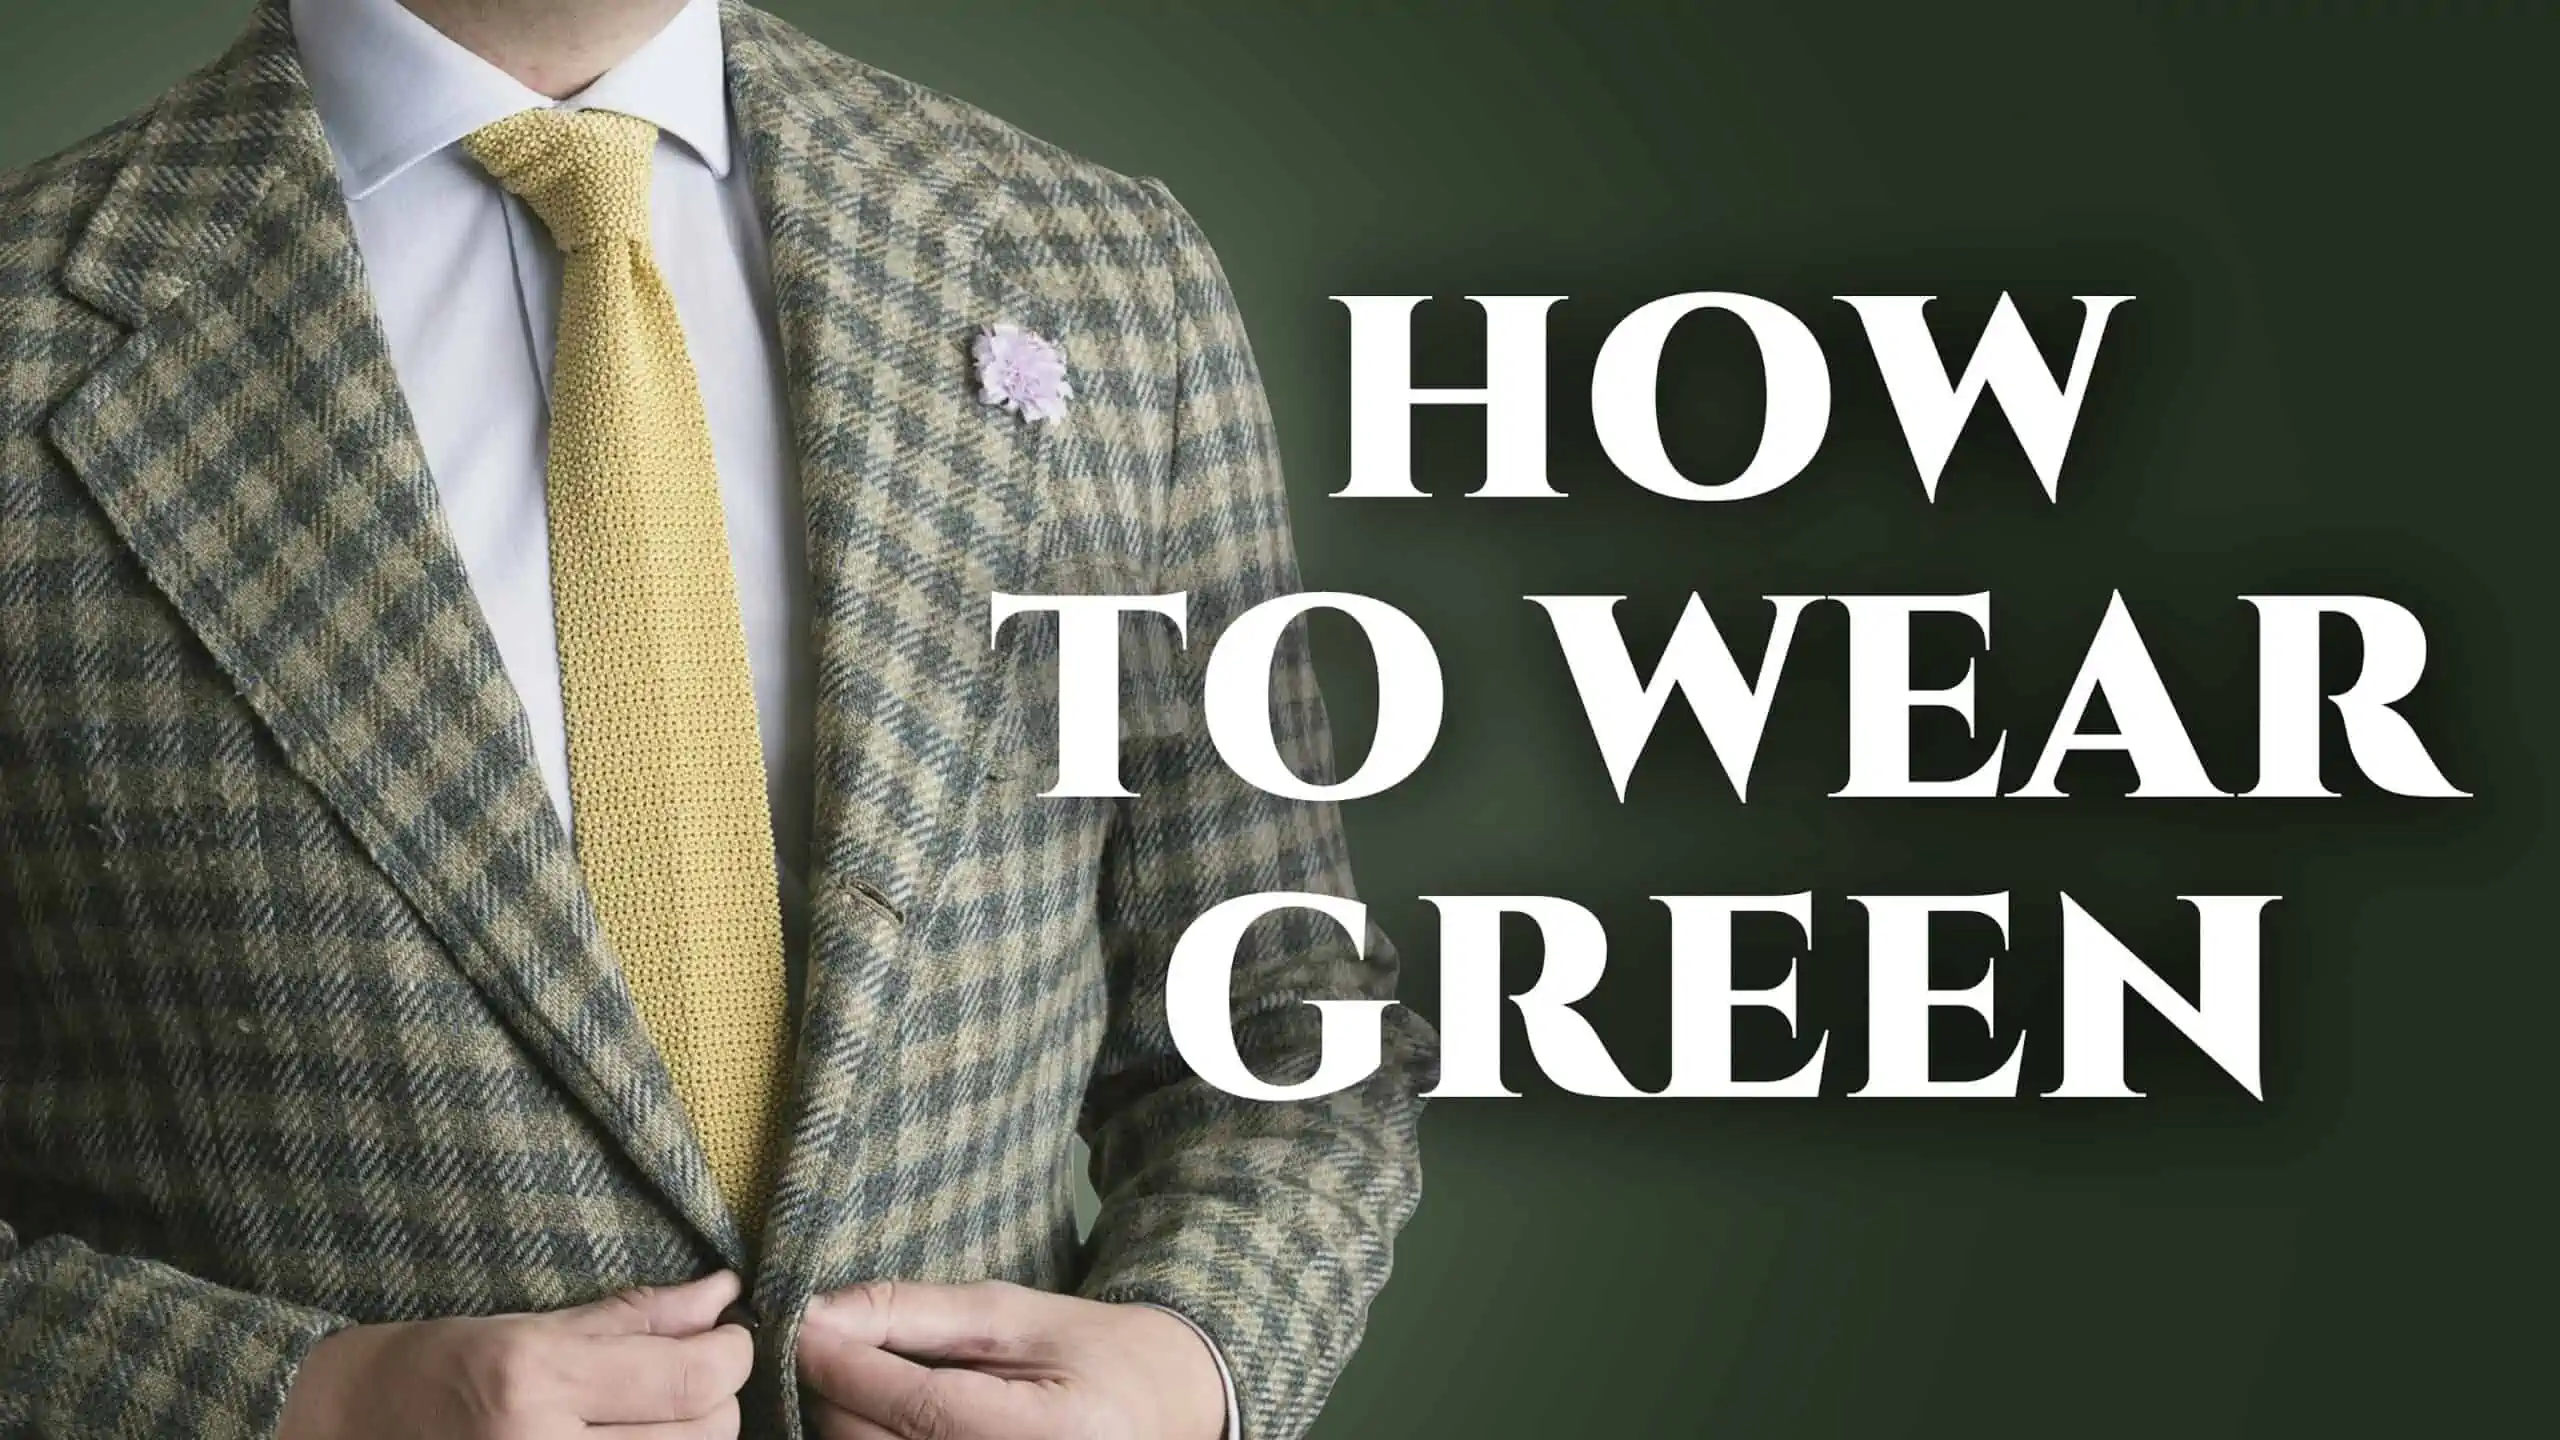 how to wear pair green 3840x2160 scaled